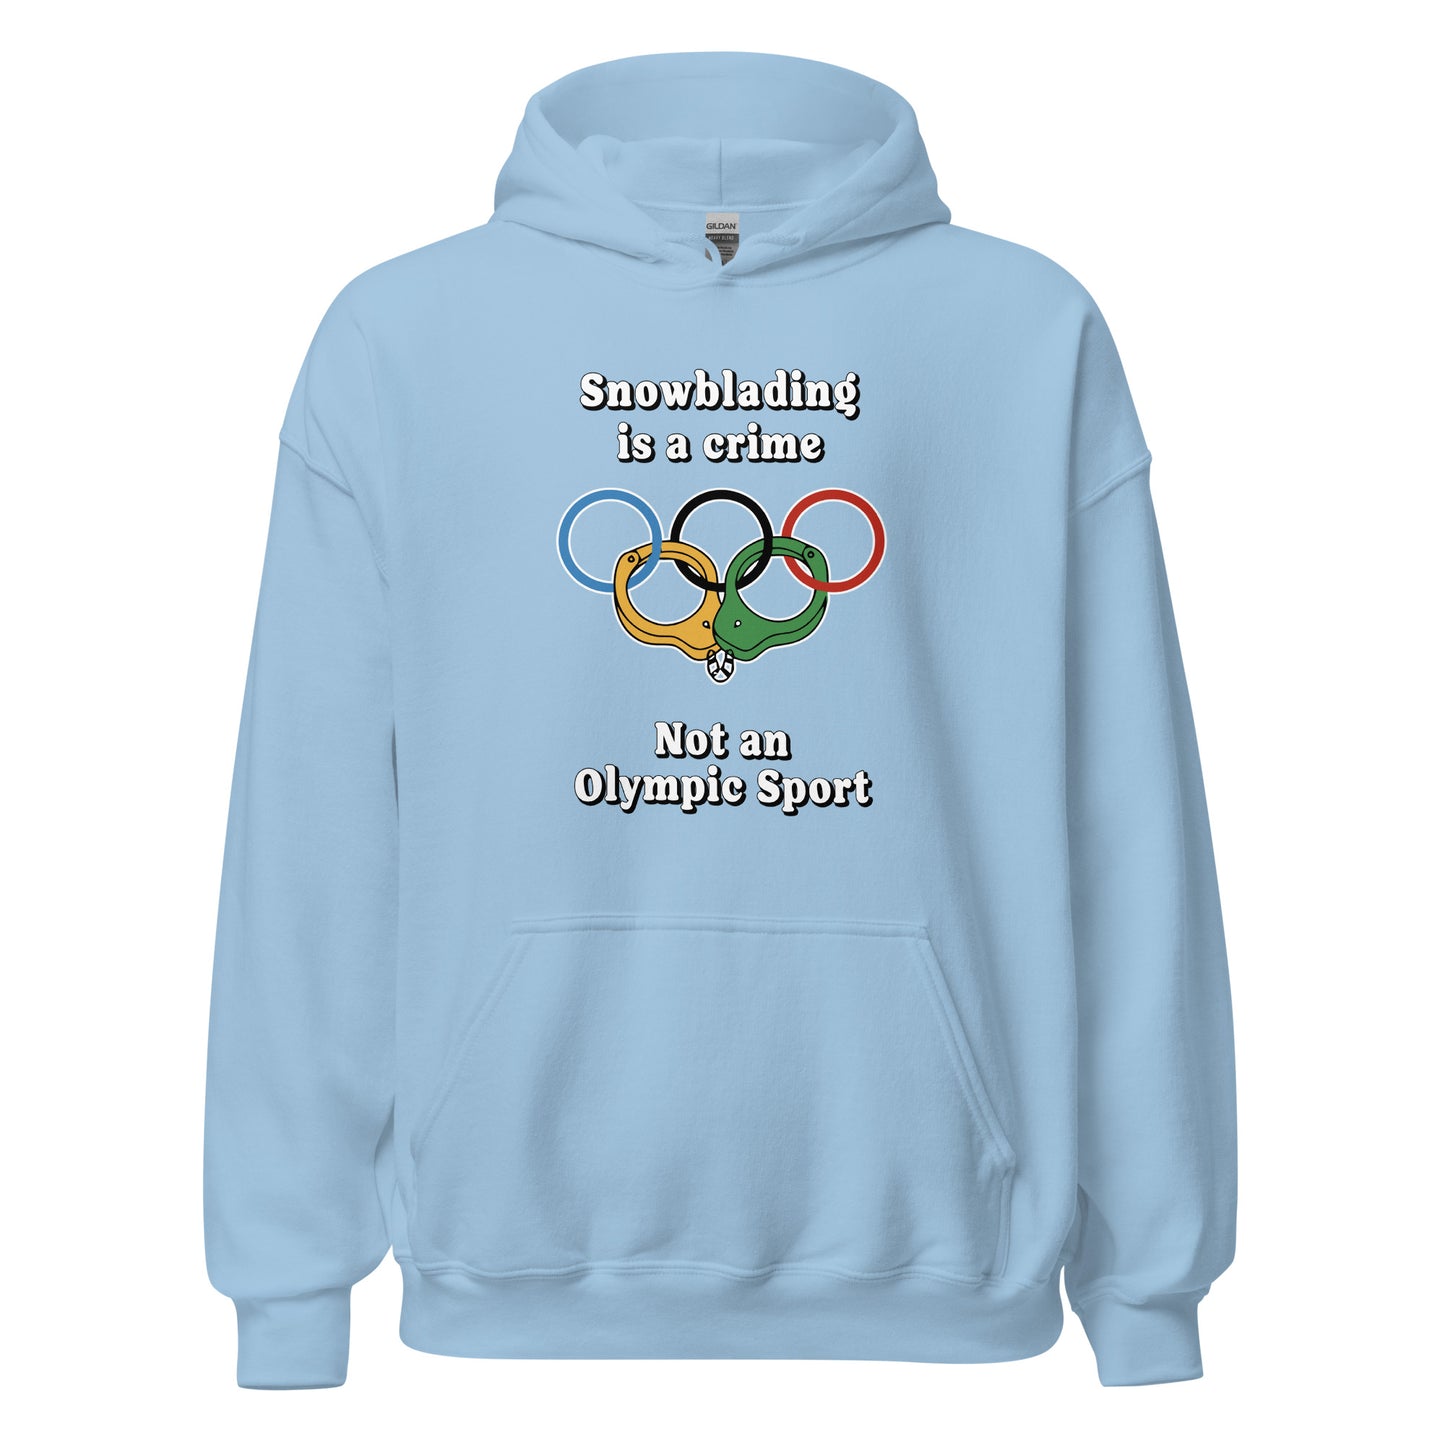 Snowblading is a crime not an olympic sport design on hoodie printed by Whistler Shirts